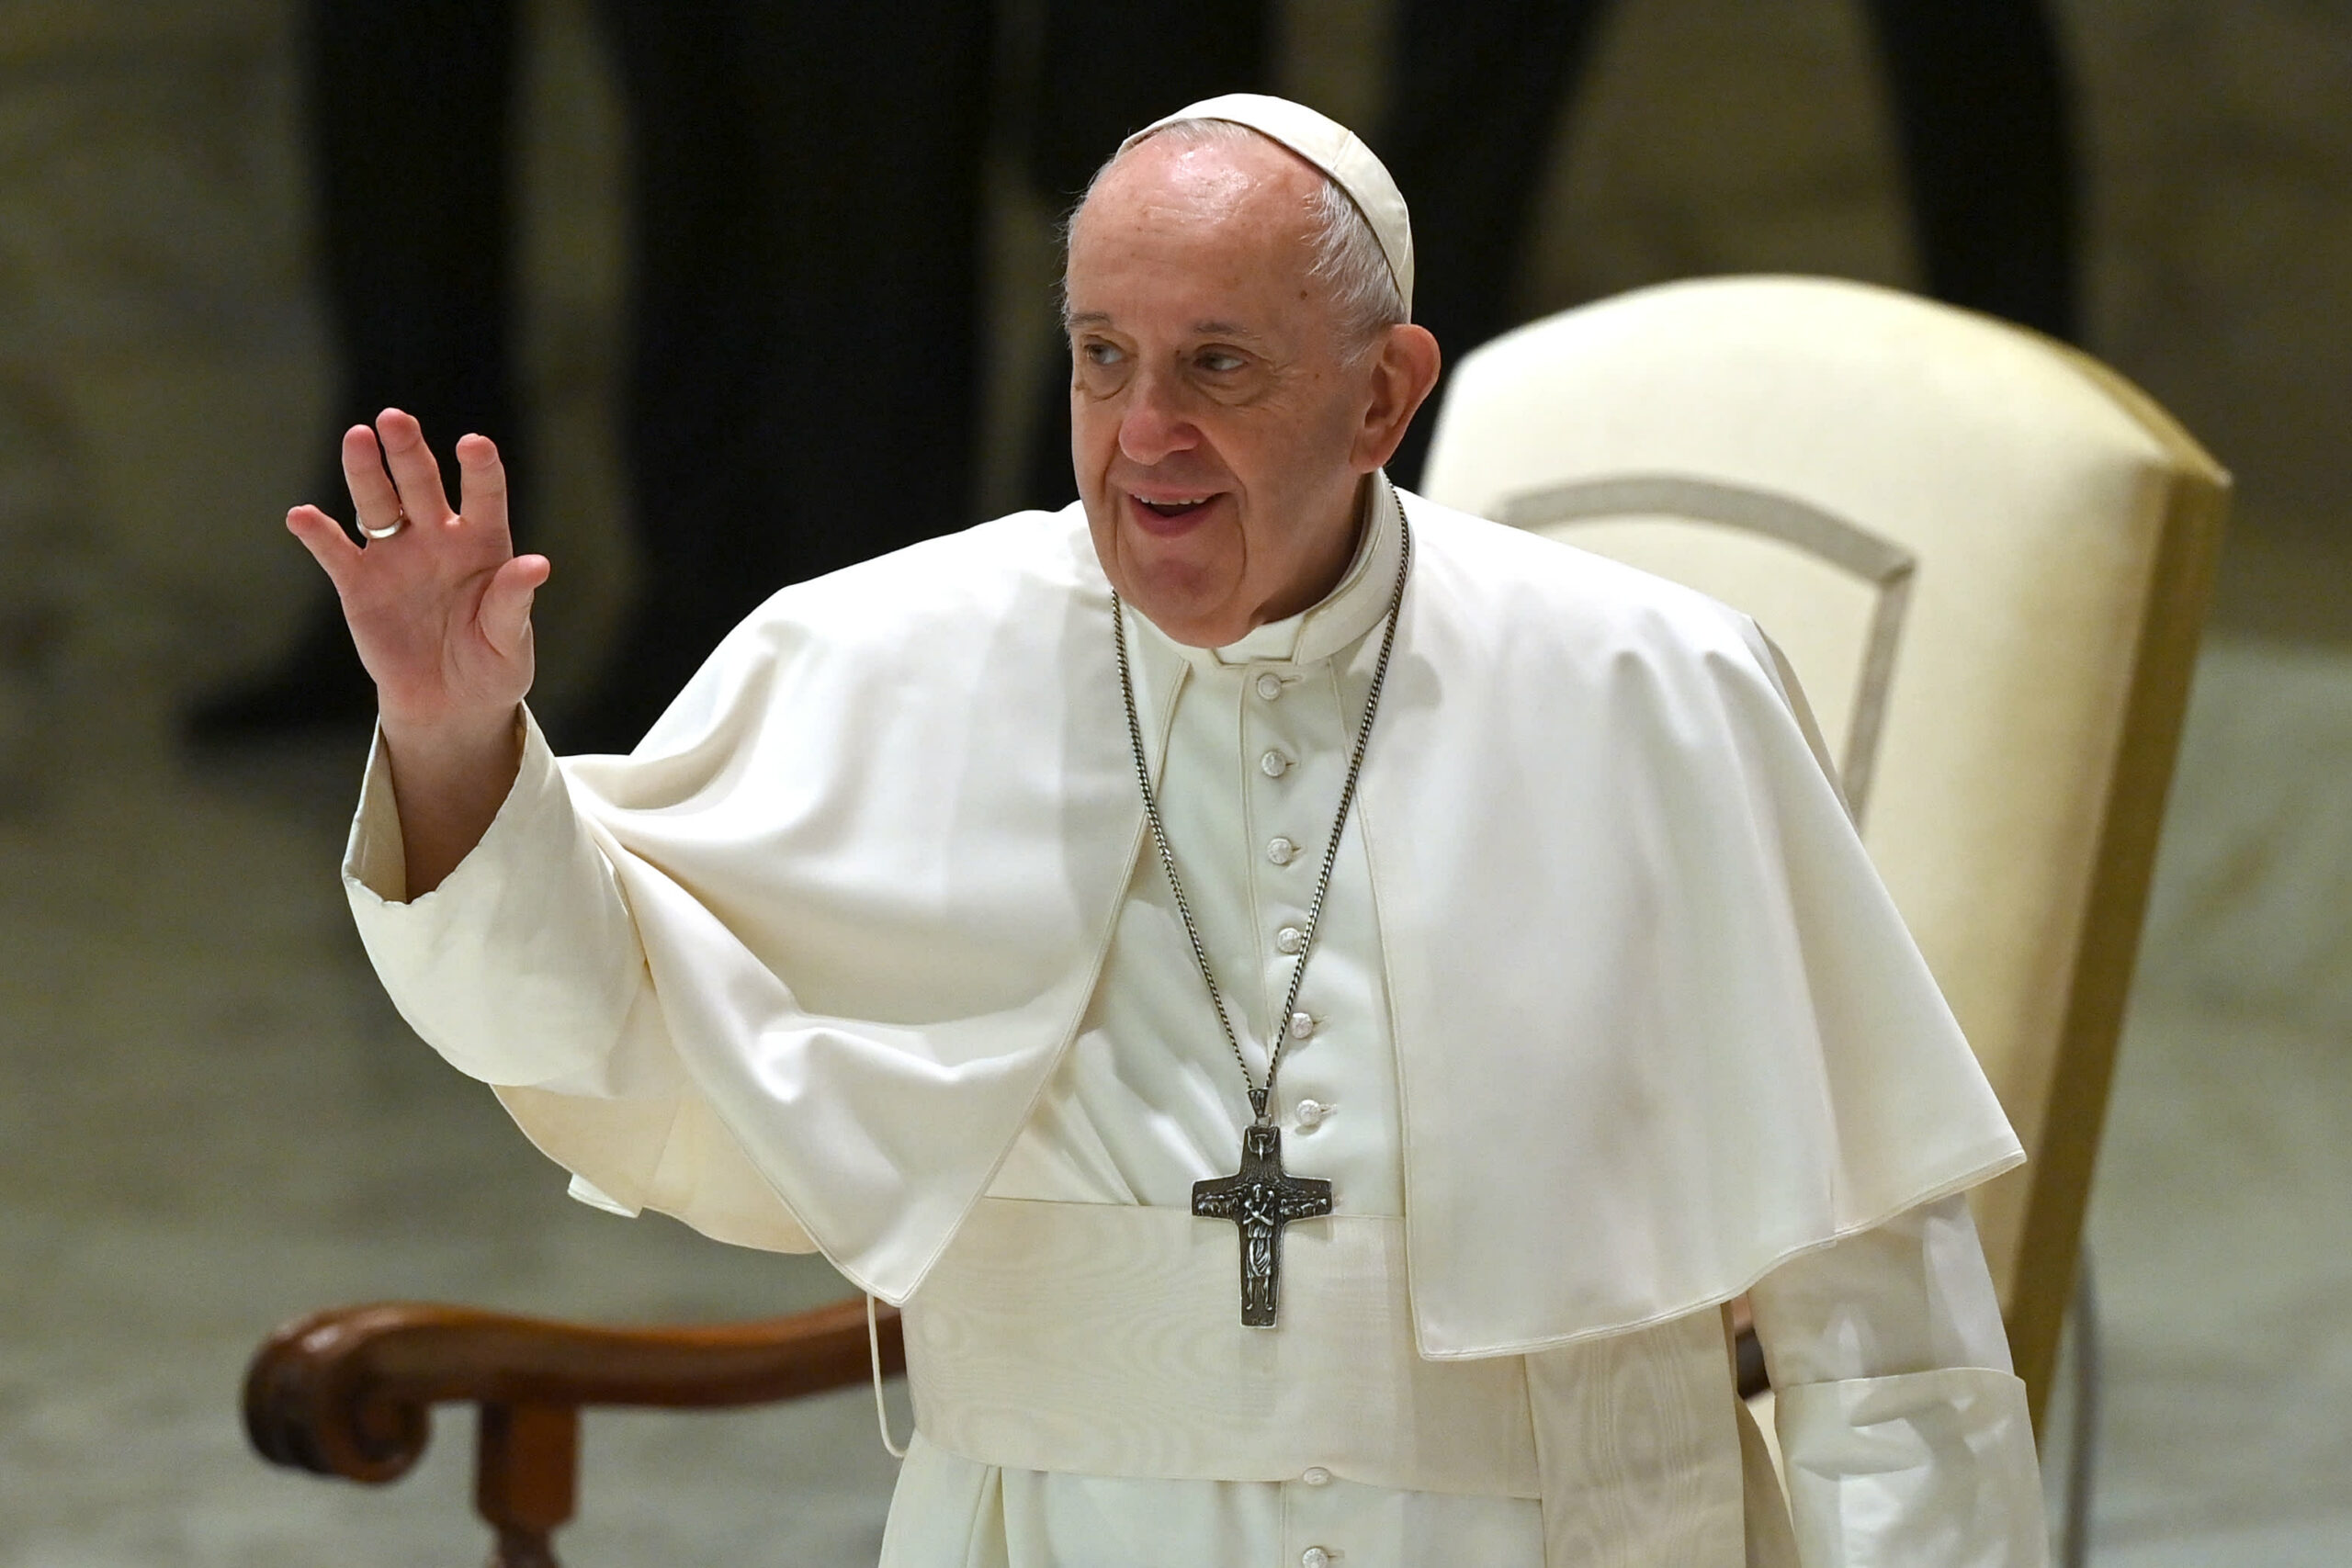 Pope Francis is operated on for colon diverticulitis